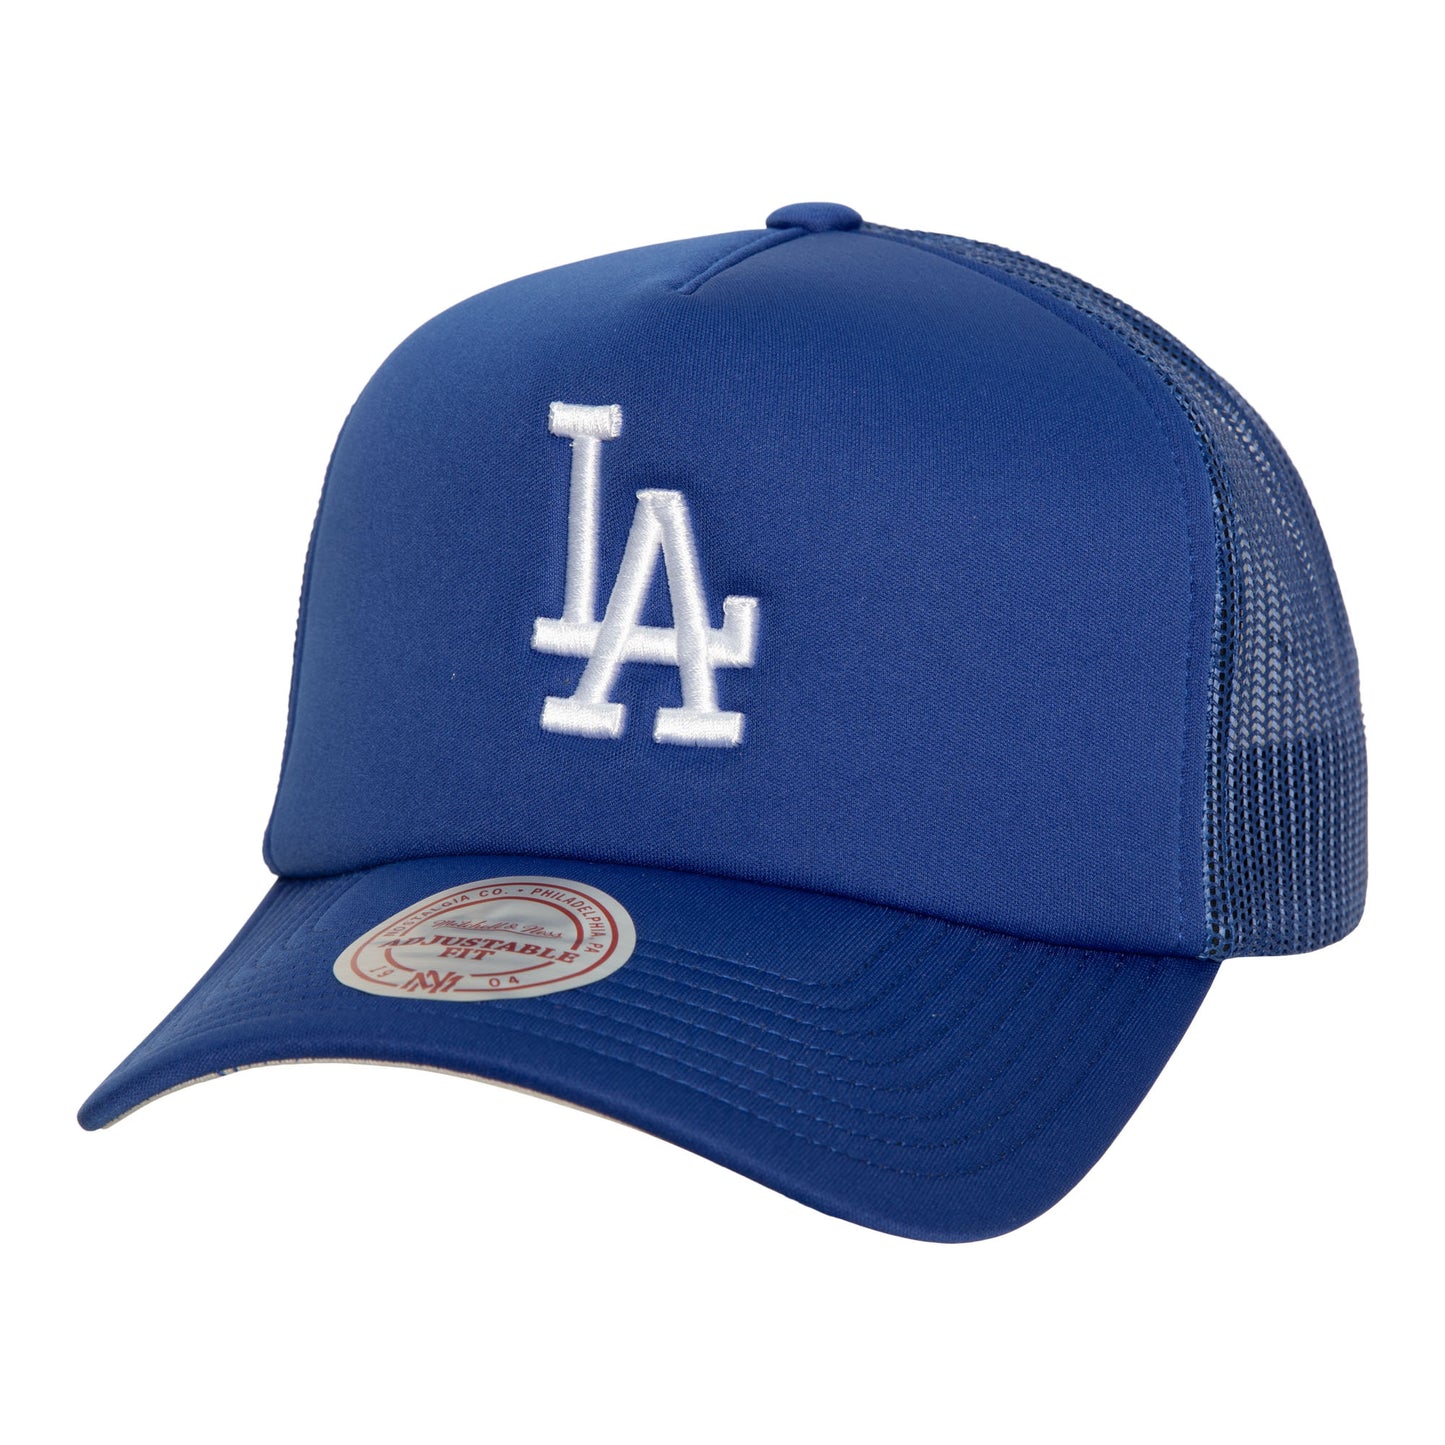 Los Angeles Dodgers  Mitchell & Ness Evergreen Royal Cooperstown Foam Trucker Snap Back Hat